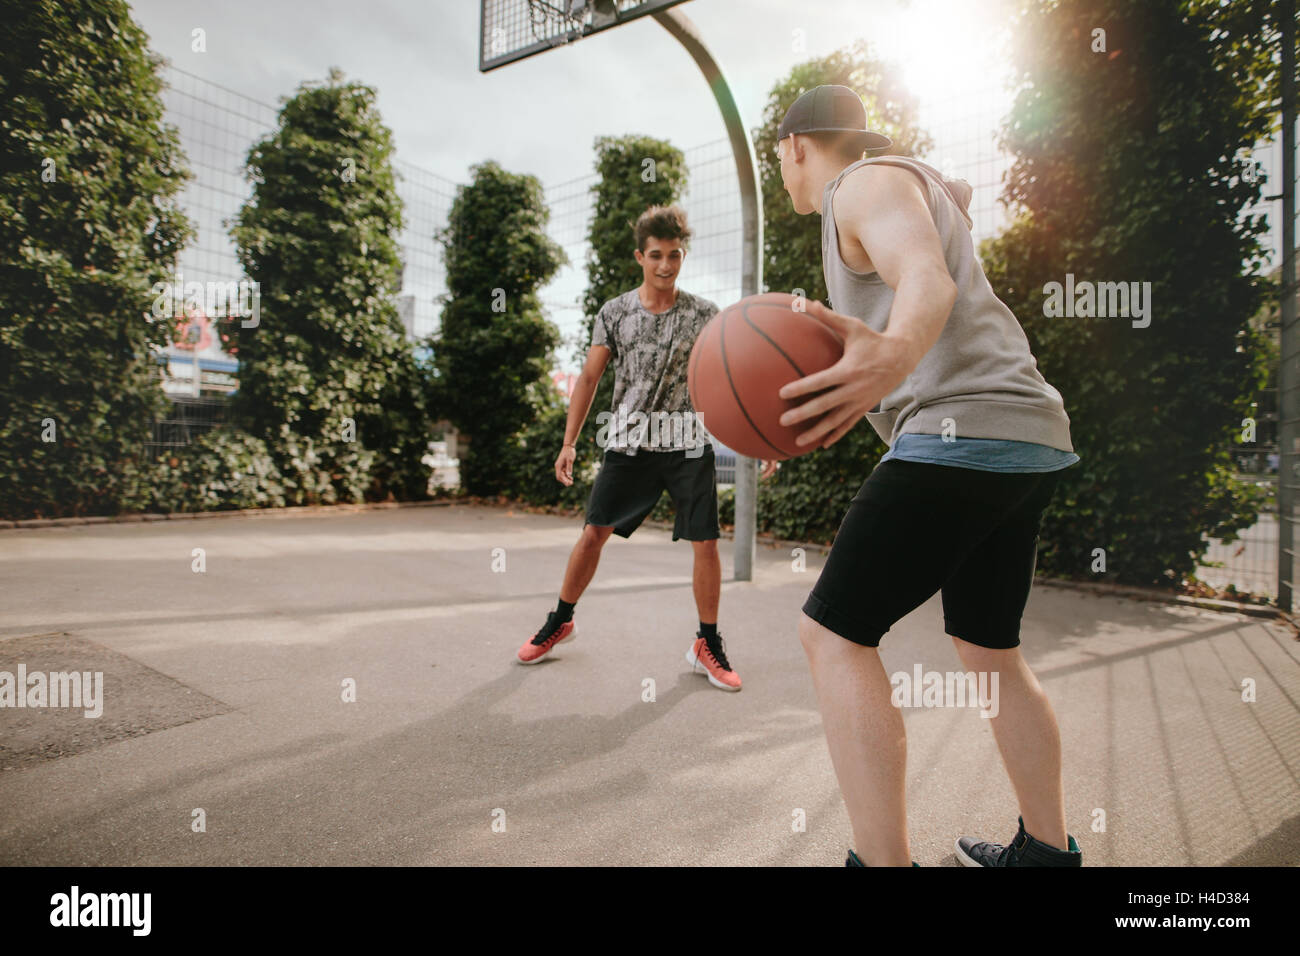 Shot of young man dribbling ball with friend blocking on basketball court. Friends playing basketball on outdoor court. Stock Photo